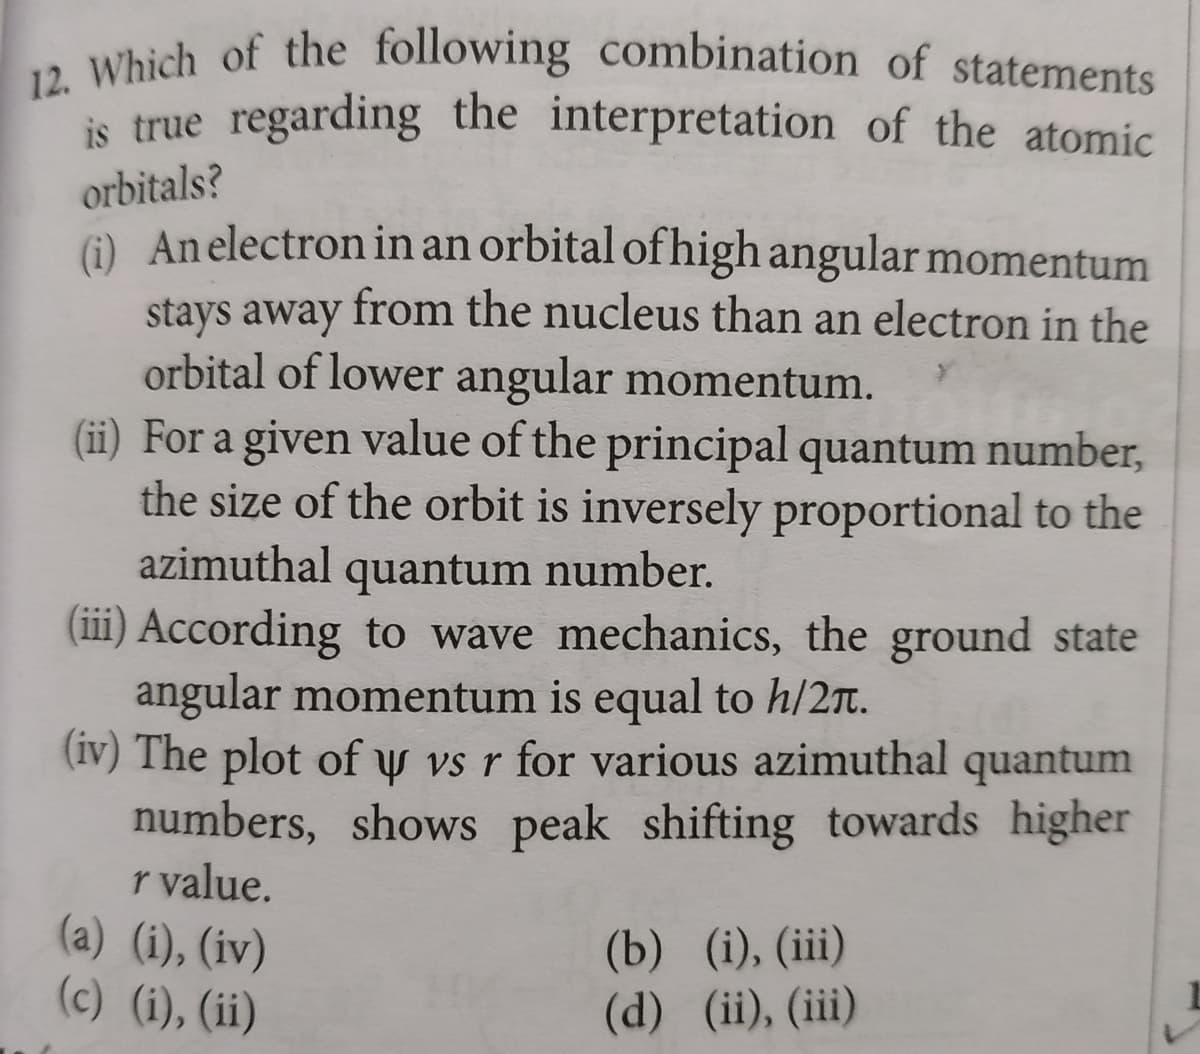 12. Which of the following combination of statements
is true regarding the interpretation of the atomic
orbitals?
) An electron in an orbital of high angular momentum
stays away from the nucleus than an electron in the
orbital of lower angular momentum.
(ii) For a given value of the principal quantum number,
the size of the orbit is inversely proportional to the
azimuthal quantum number.
(iii) According to wave mechanics, the ground state
angular momentum is equal to h/2T.
(iv) The plot of y vs r for various azimuthal quantum
numbers, shows peak shifting towards higher
r value.
(a) (i), (iv)
(c) (i), (ii)
(b) (i), (iii)
(d) (ii), (iii)
